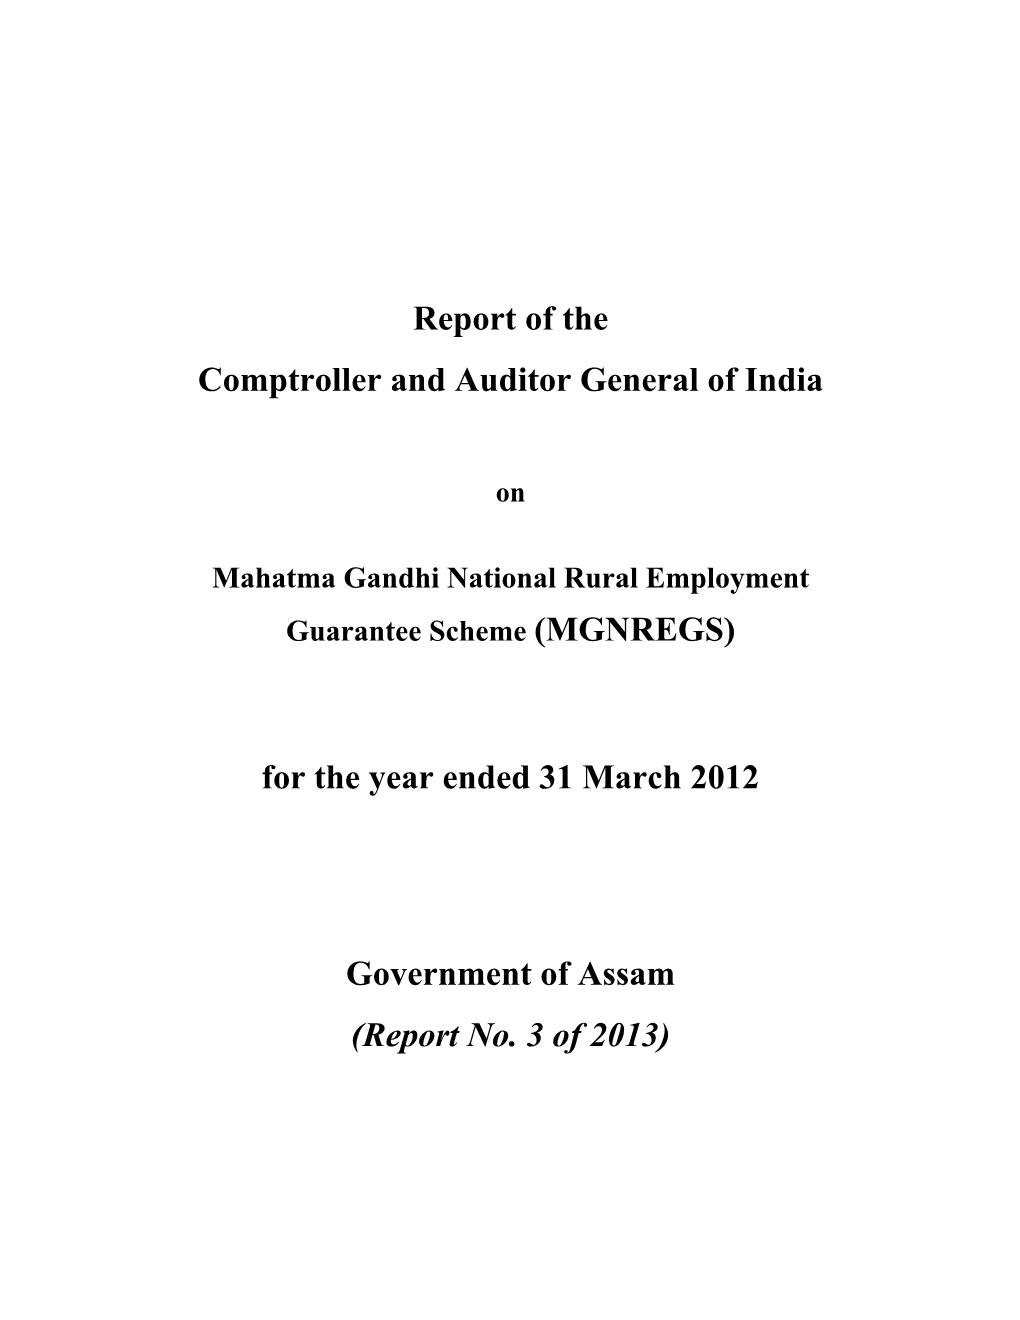 Report of the Comptroller and Auditor General of India for the Year Ended